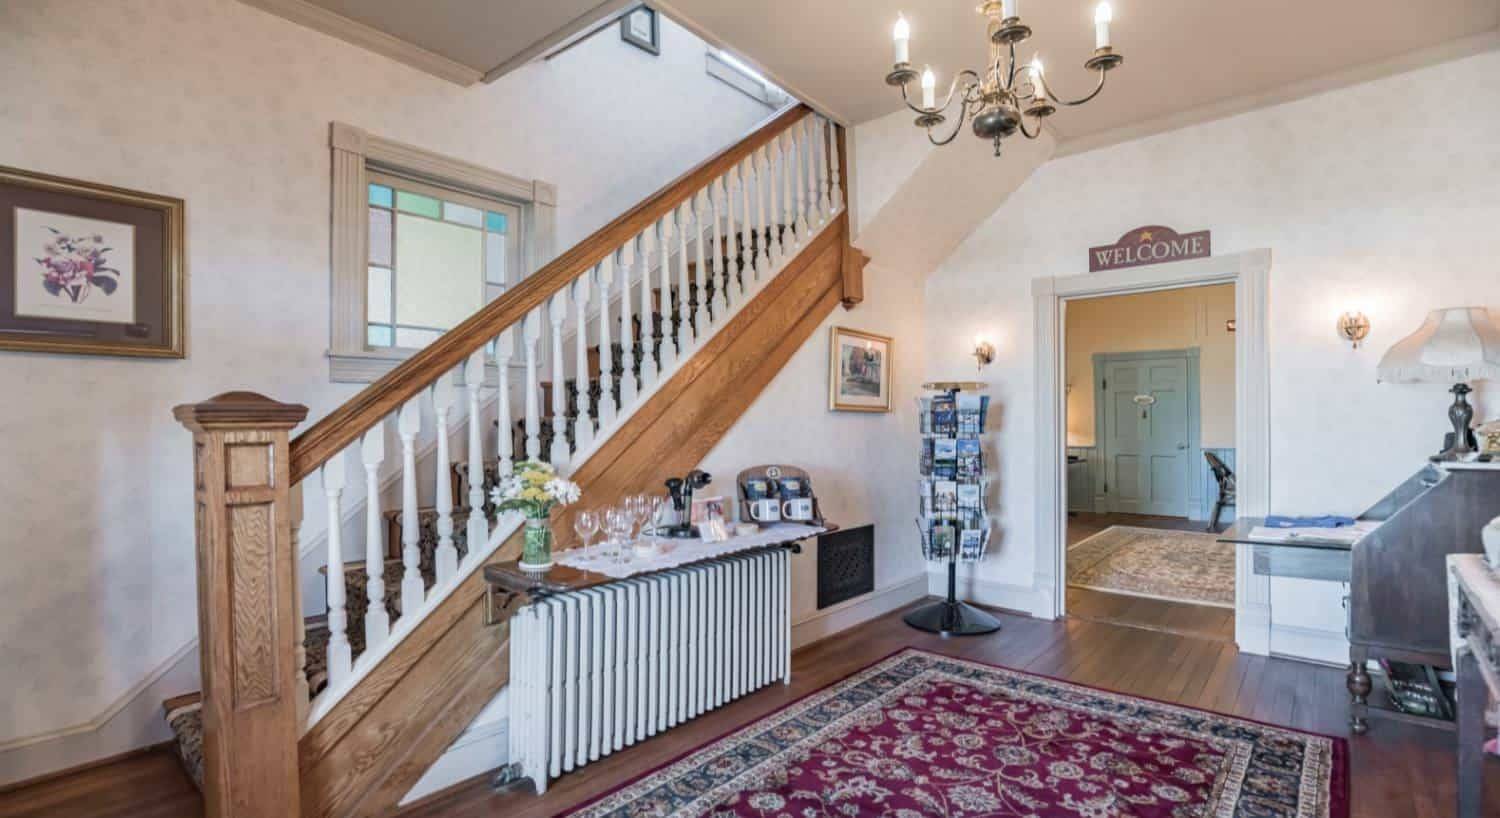 Entry area with light colored wallpaper, hardwood floors, large area rug, and wooden staircase with white spindles leading up to the second floor